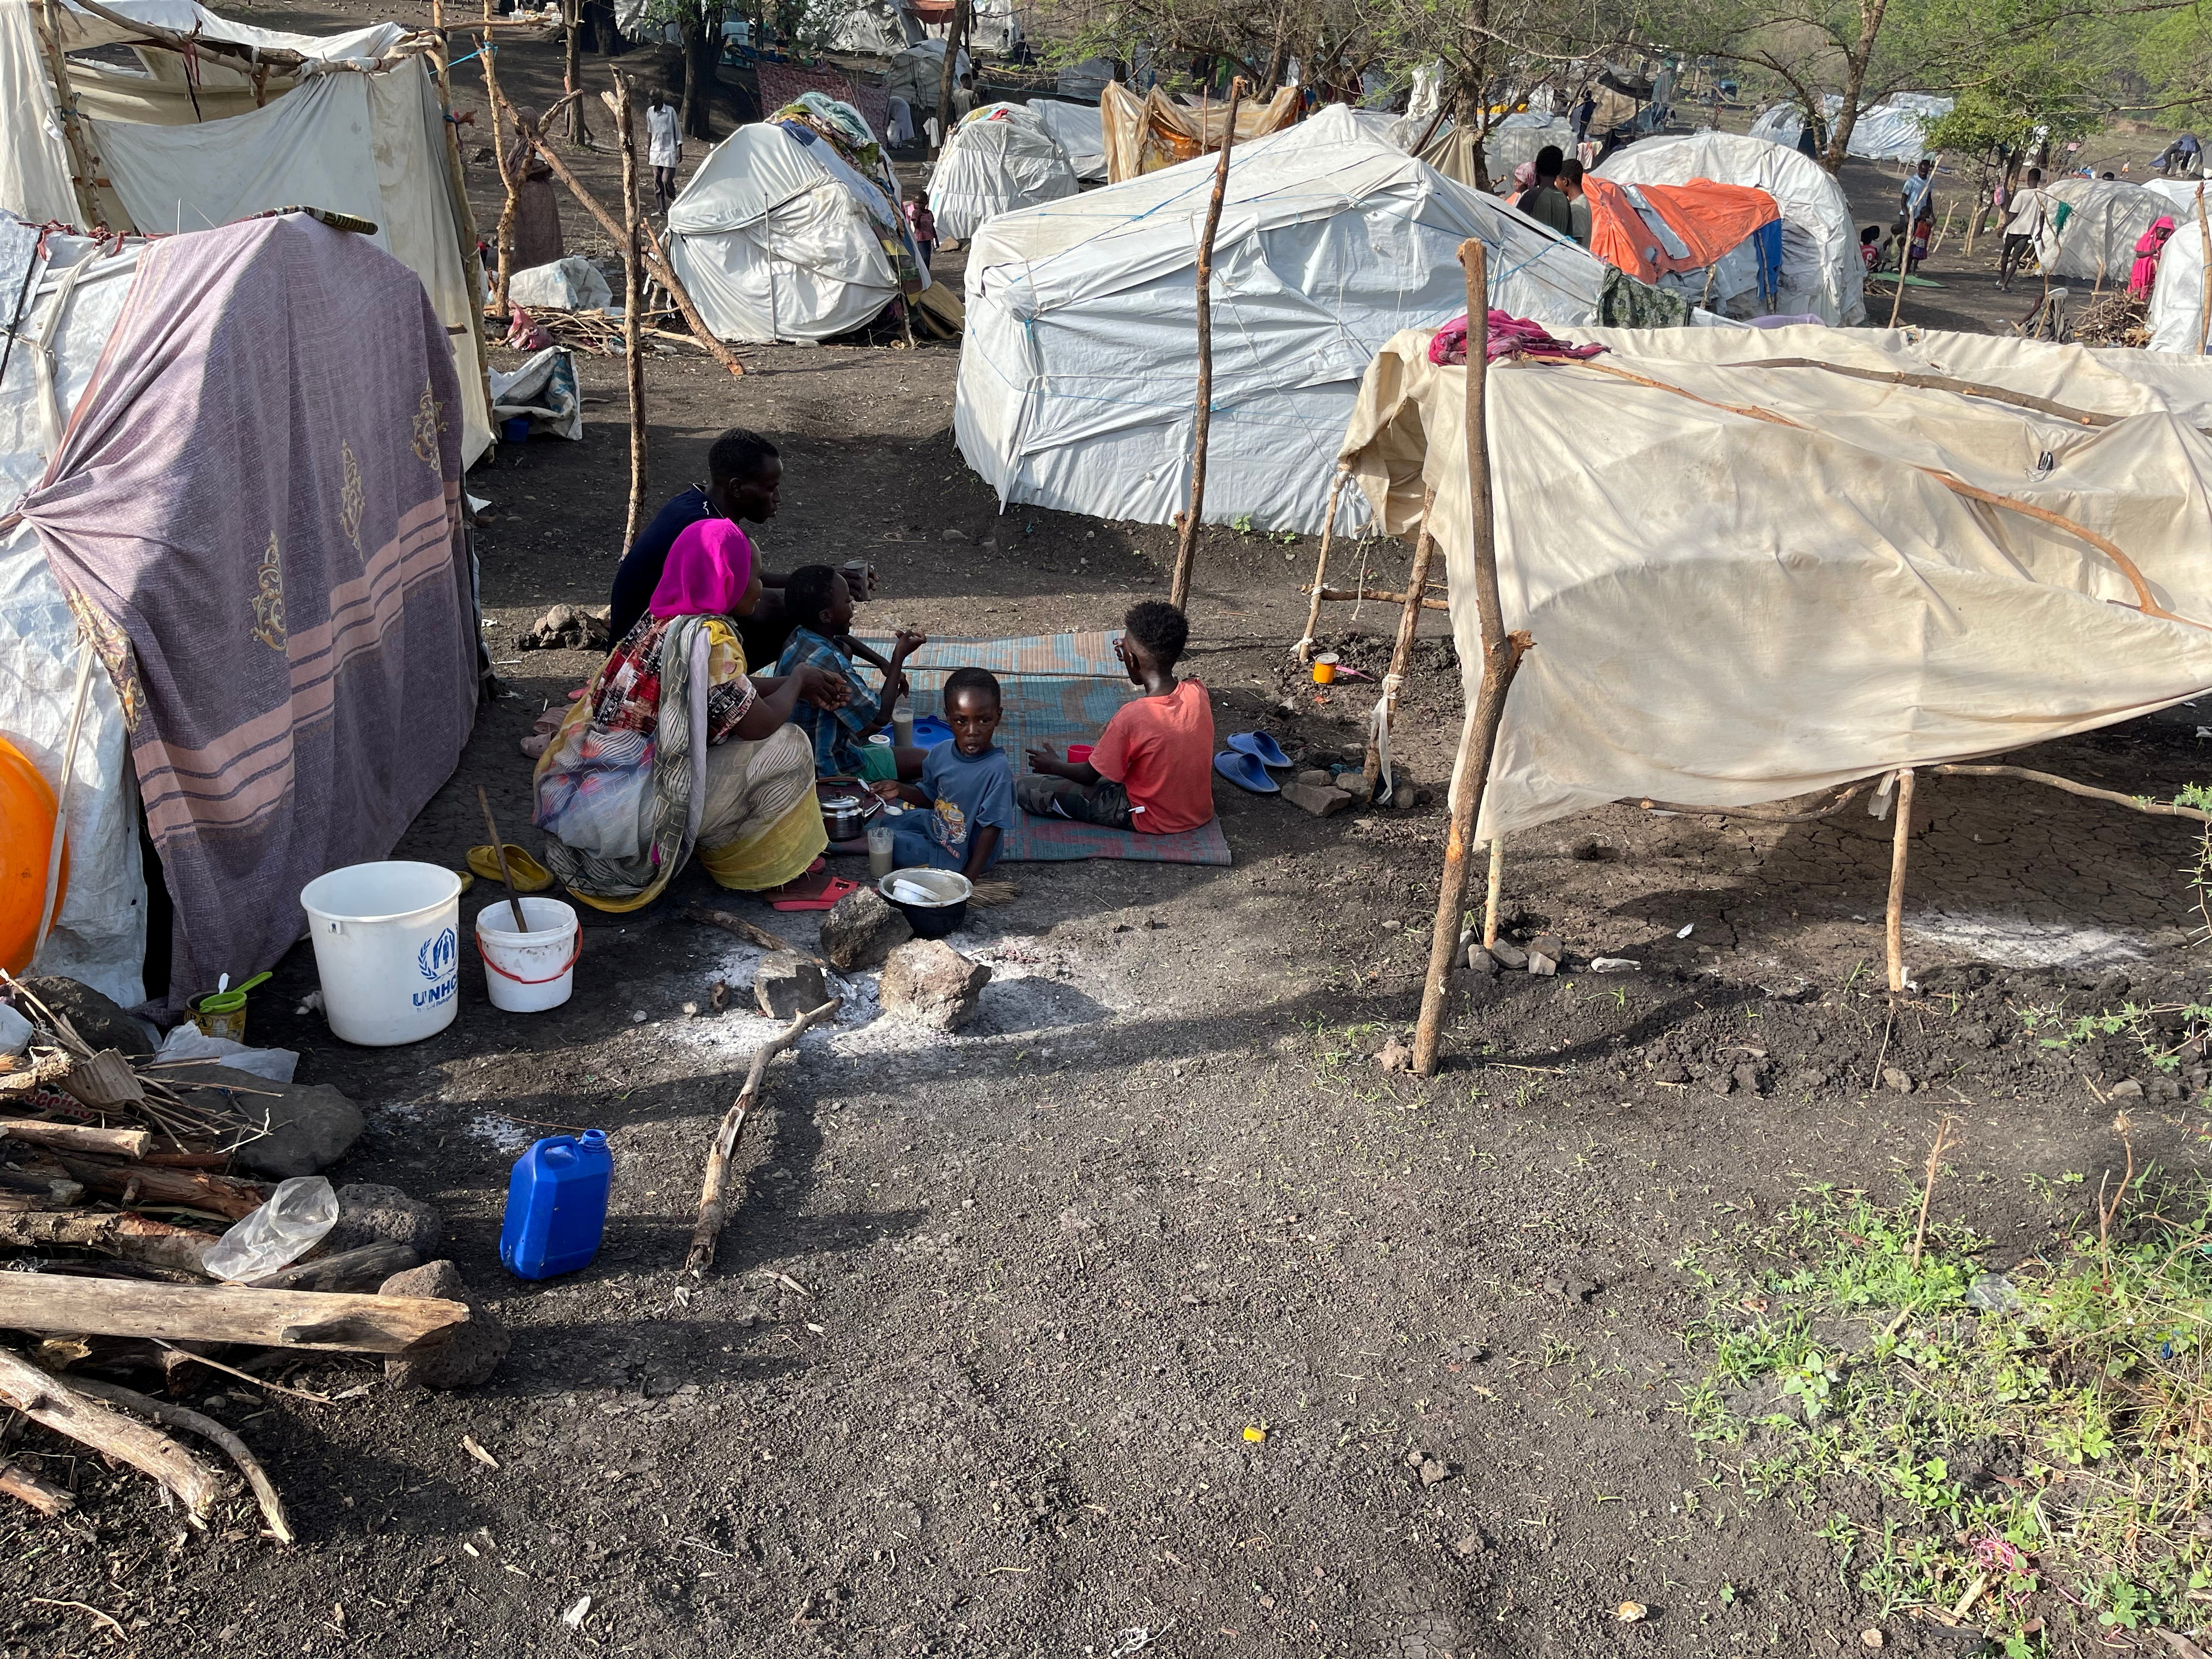 Sudan refugees say attacks leave thousands stranded in Ethiopian forest